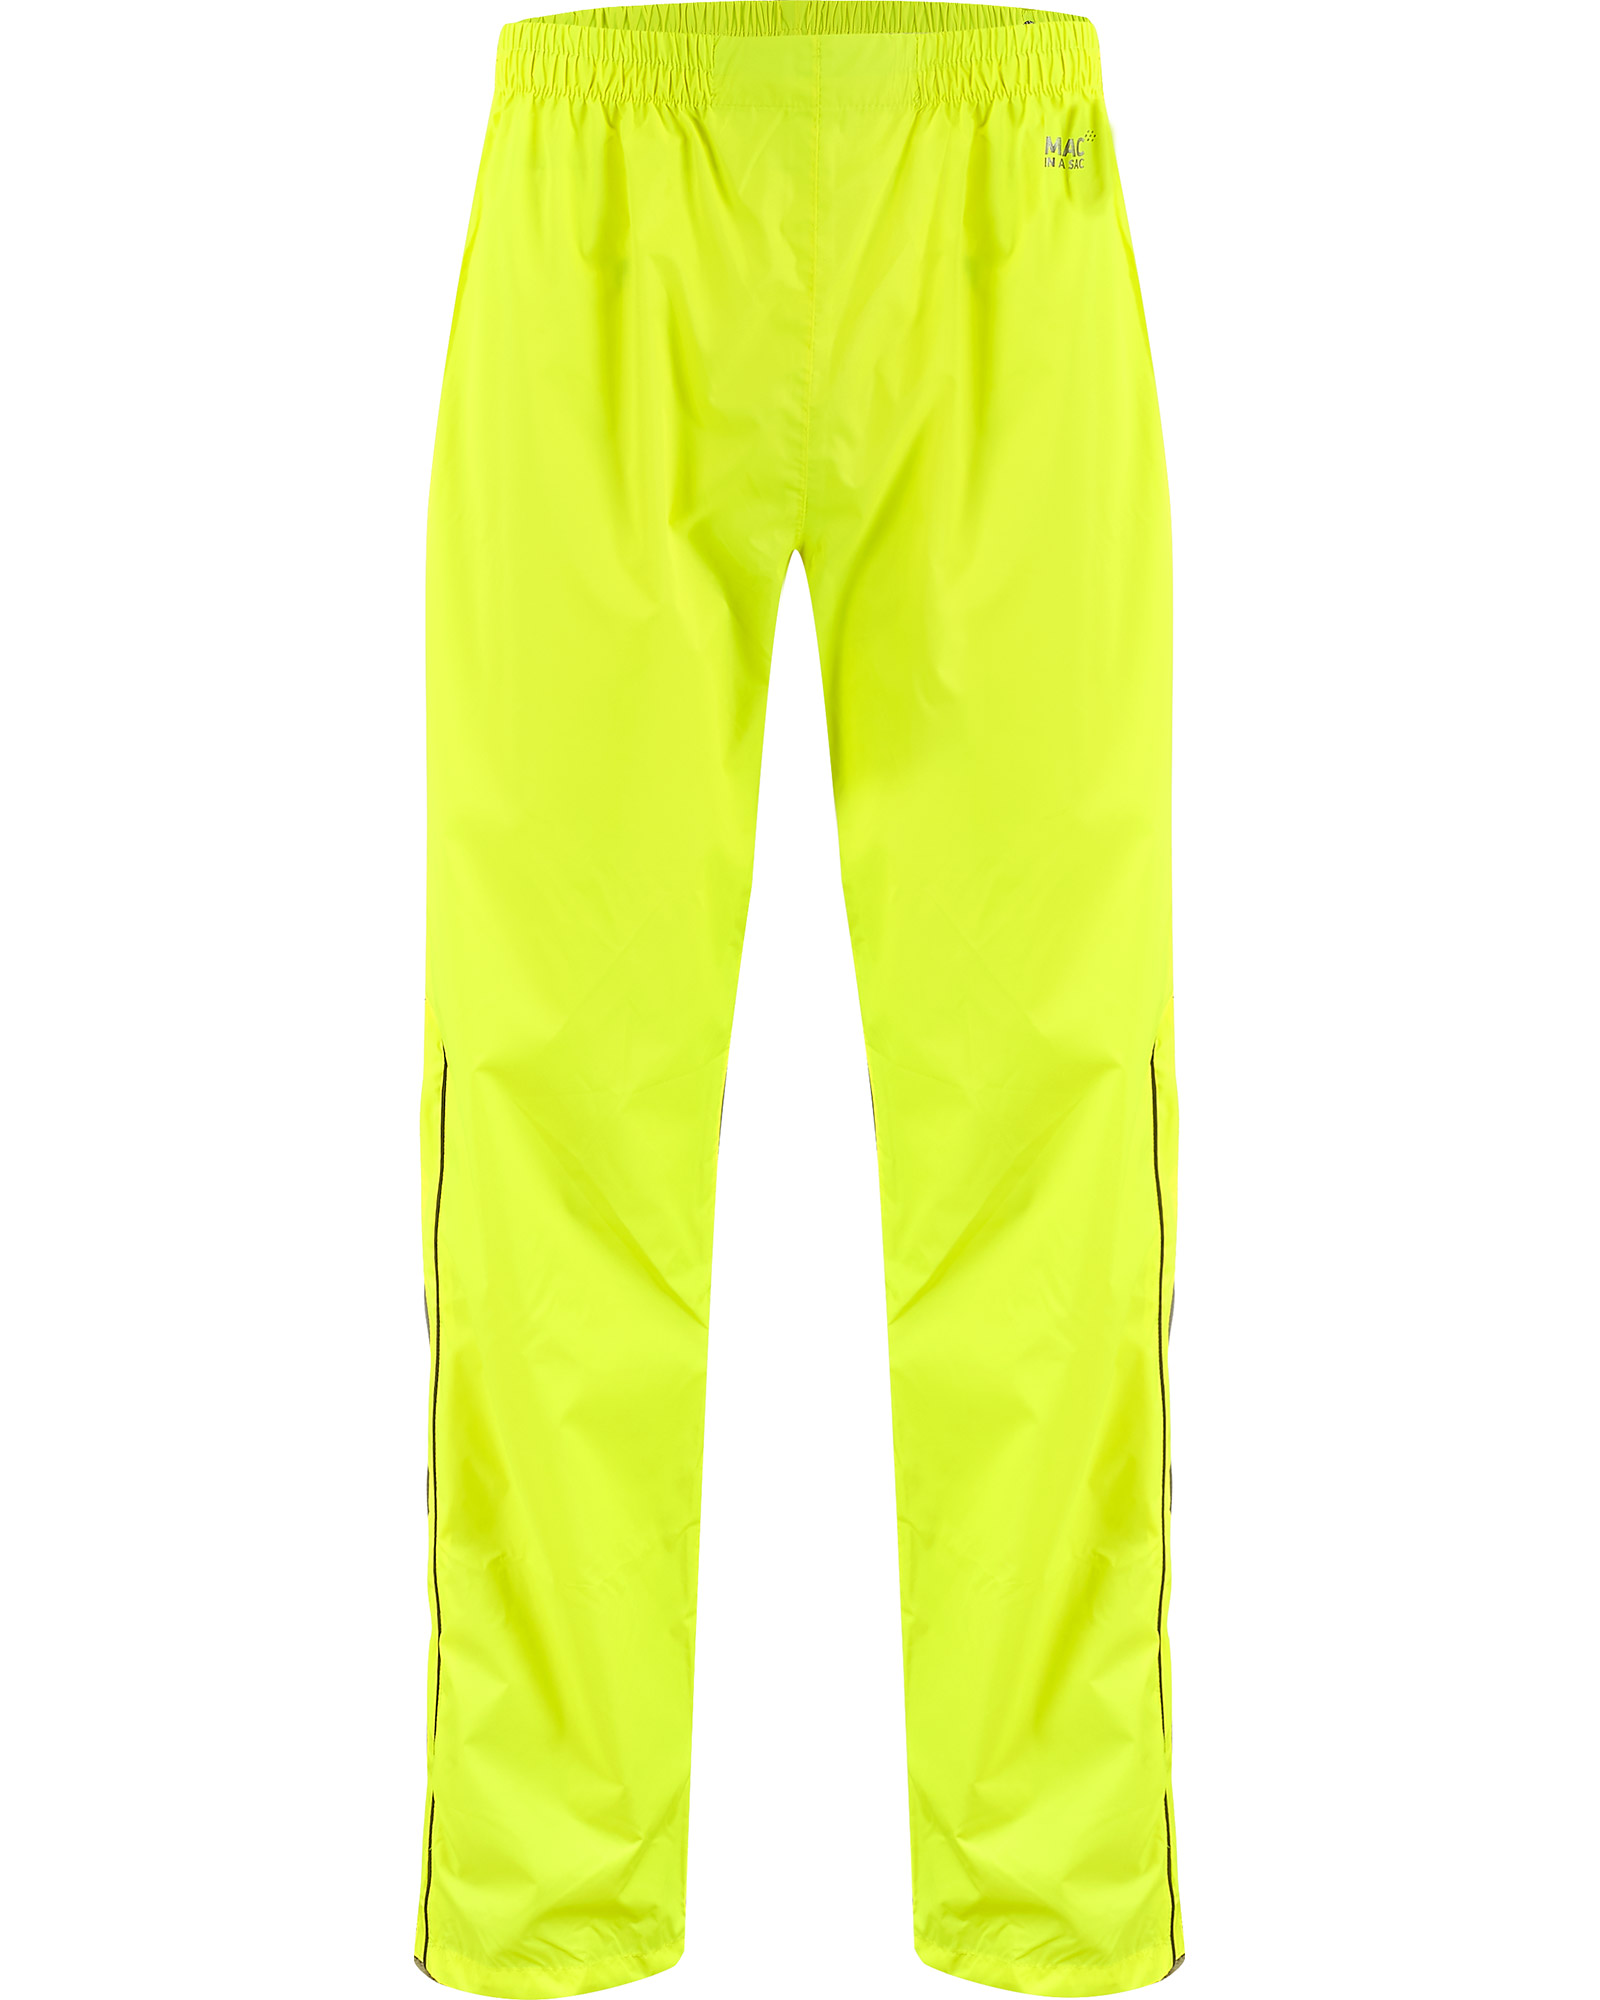 Target Dry Mac in a Sac Adult Full Zip Packable Waterproof Overtrousers - Neon Yellow XL